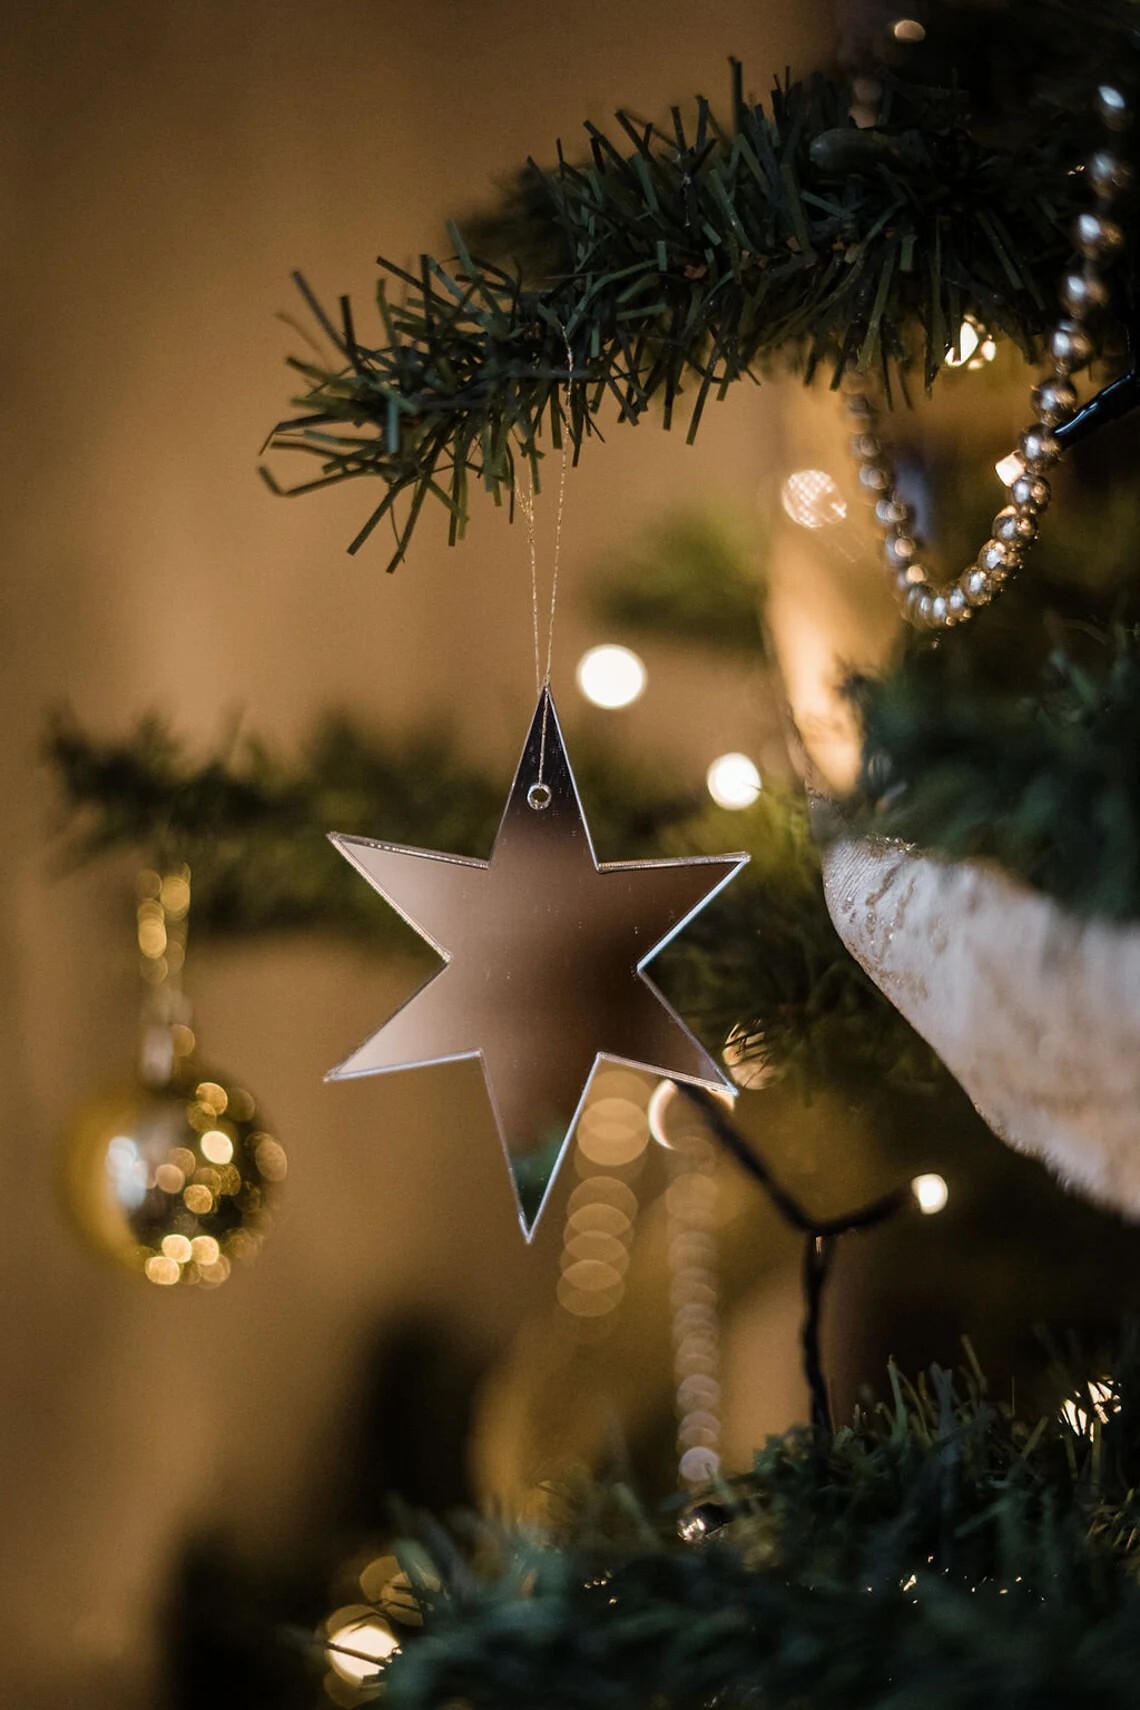 Crescent moon and star Christmas tree ornaments